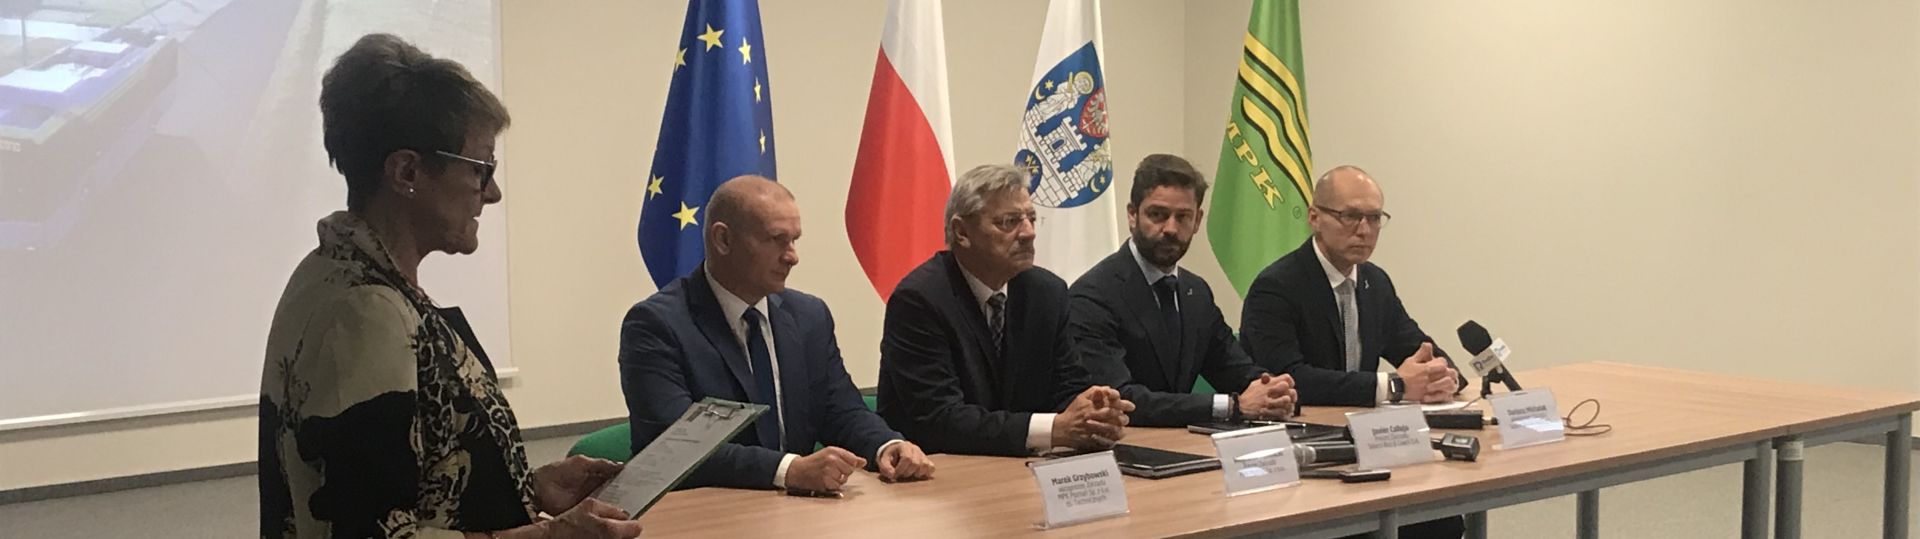 Poznań joins cities with electric bus fleets